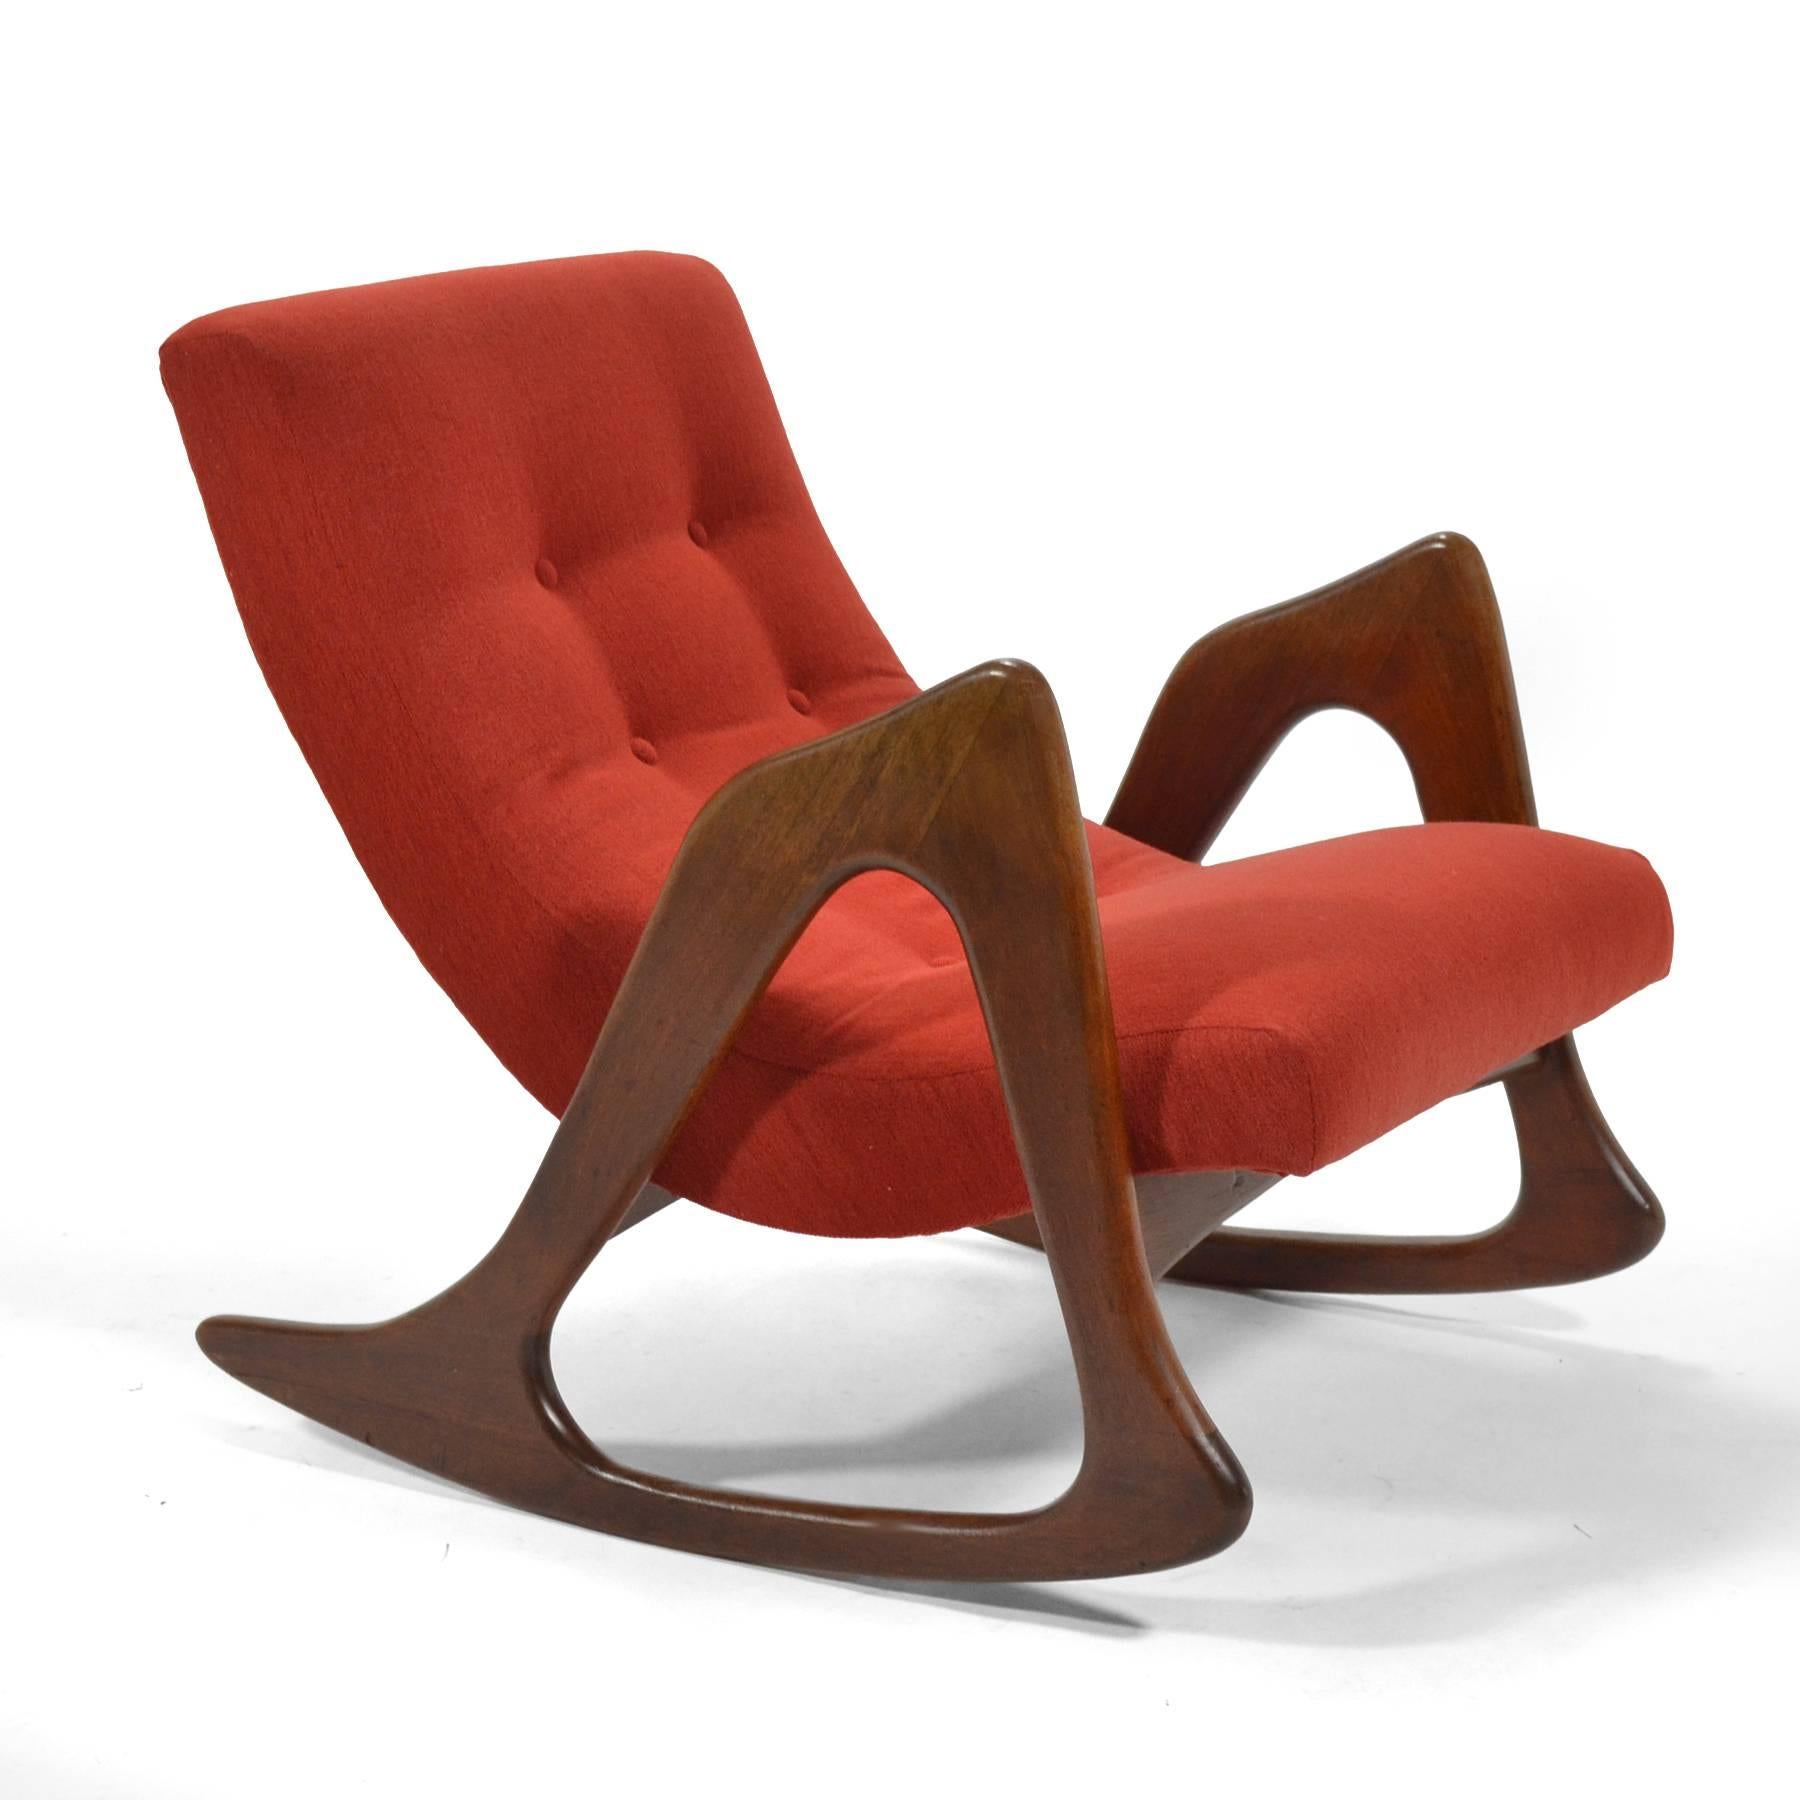 Pearsall's best designs are strong sculptural statements with solid walnut arms/ legs supporting upholstered seats. This model 812-CR rocking chair has just been restored and reupholstered.